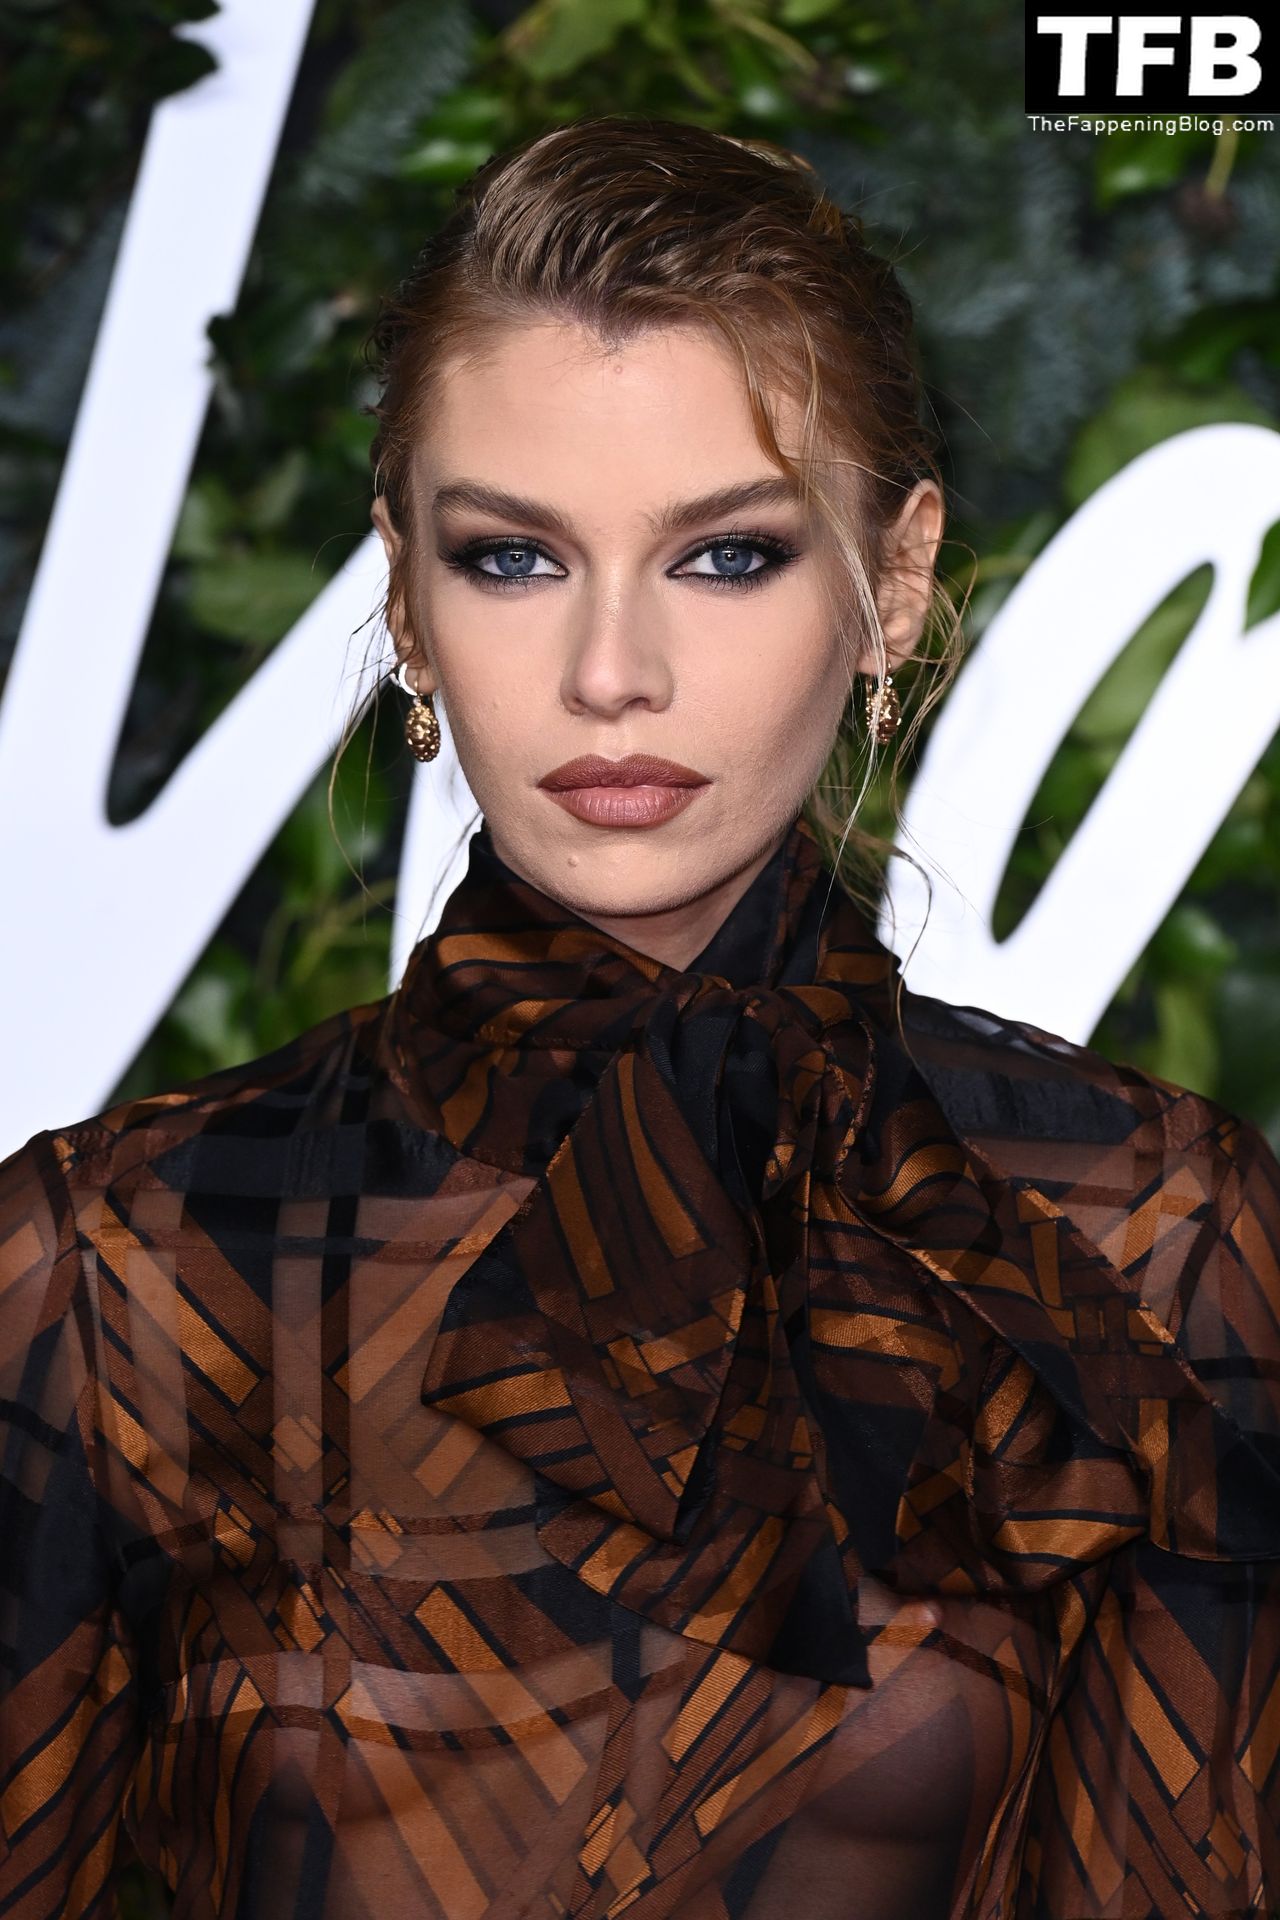 Stella-Maxwell-See-Through-Nude-The-Fappening-Blog-80.jpg